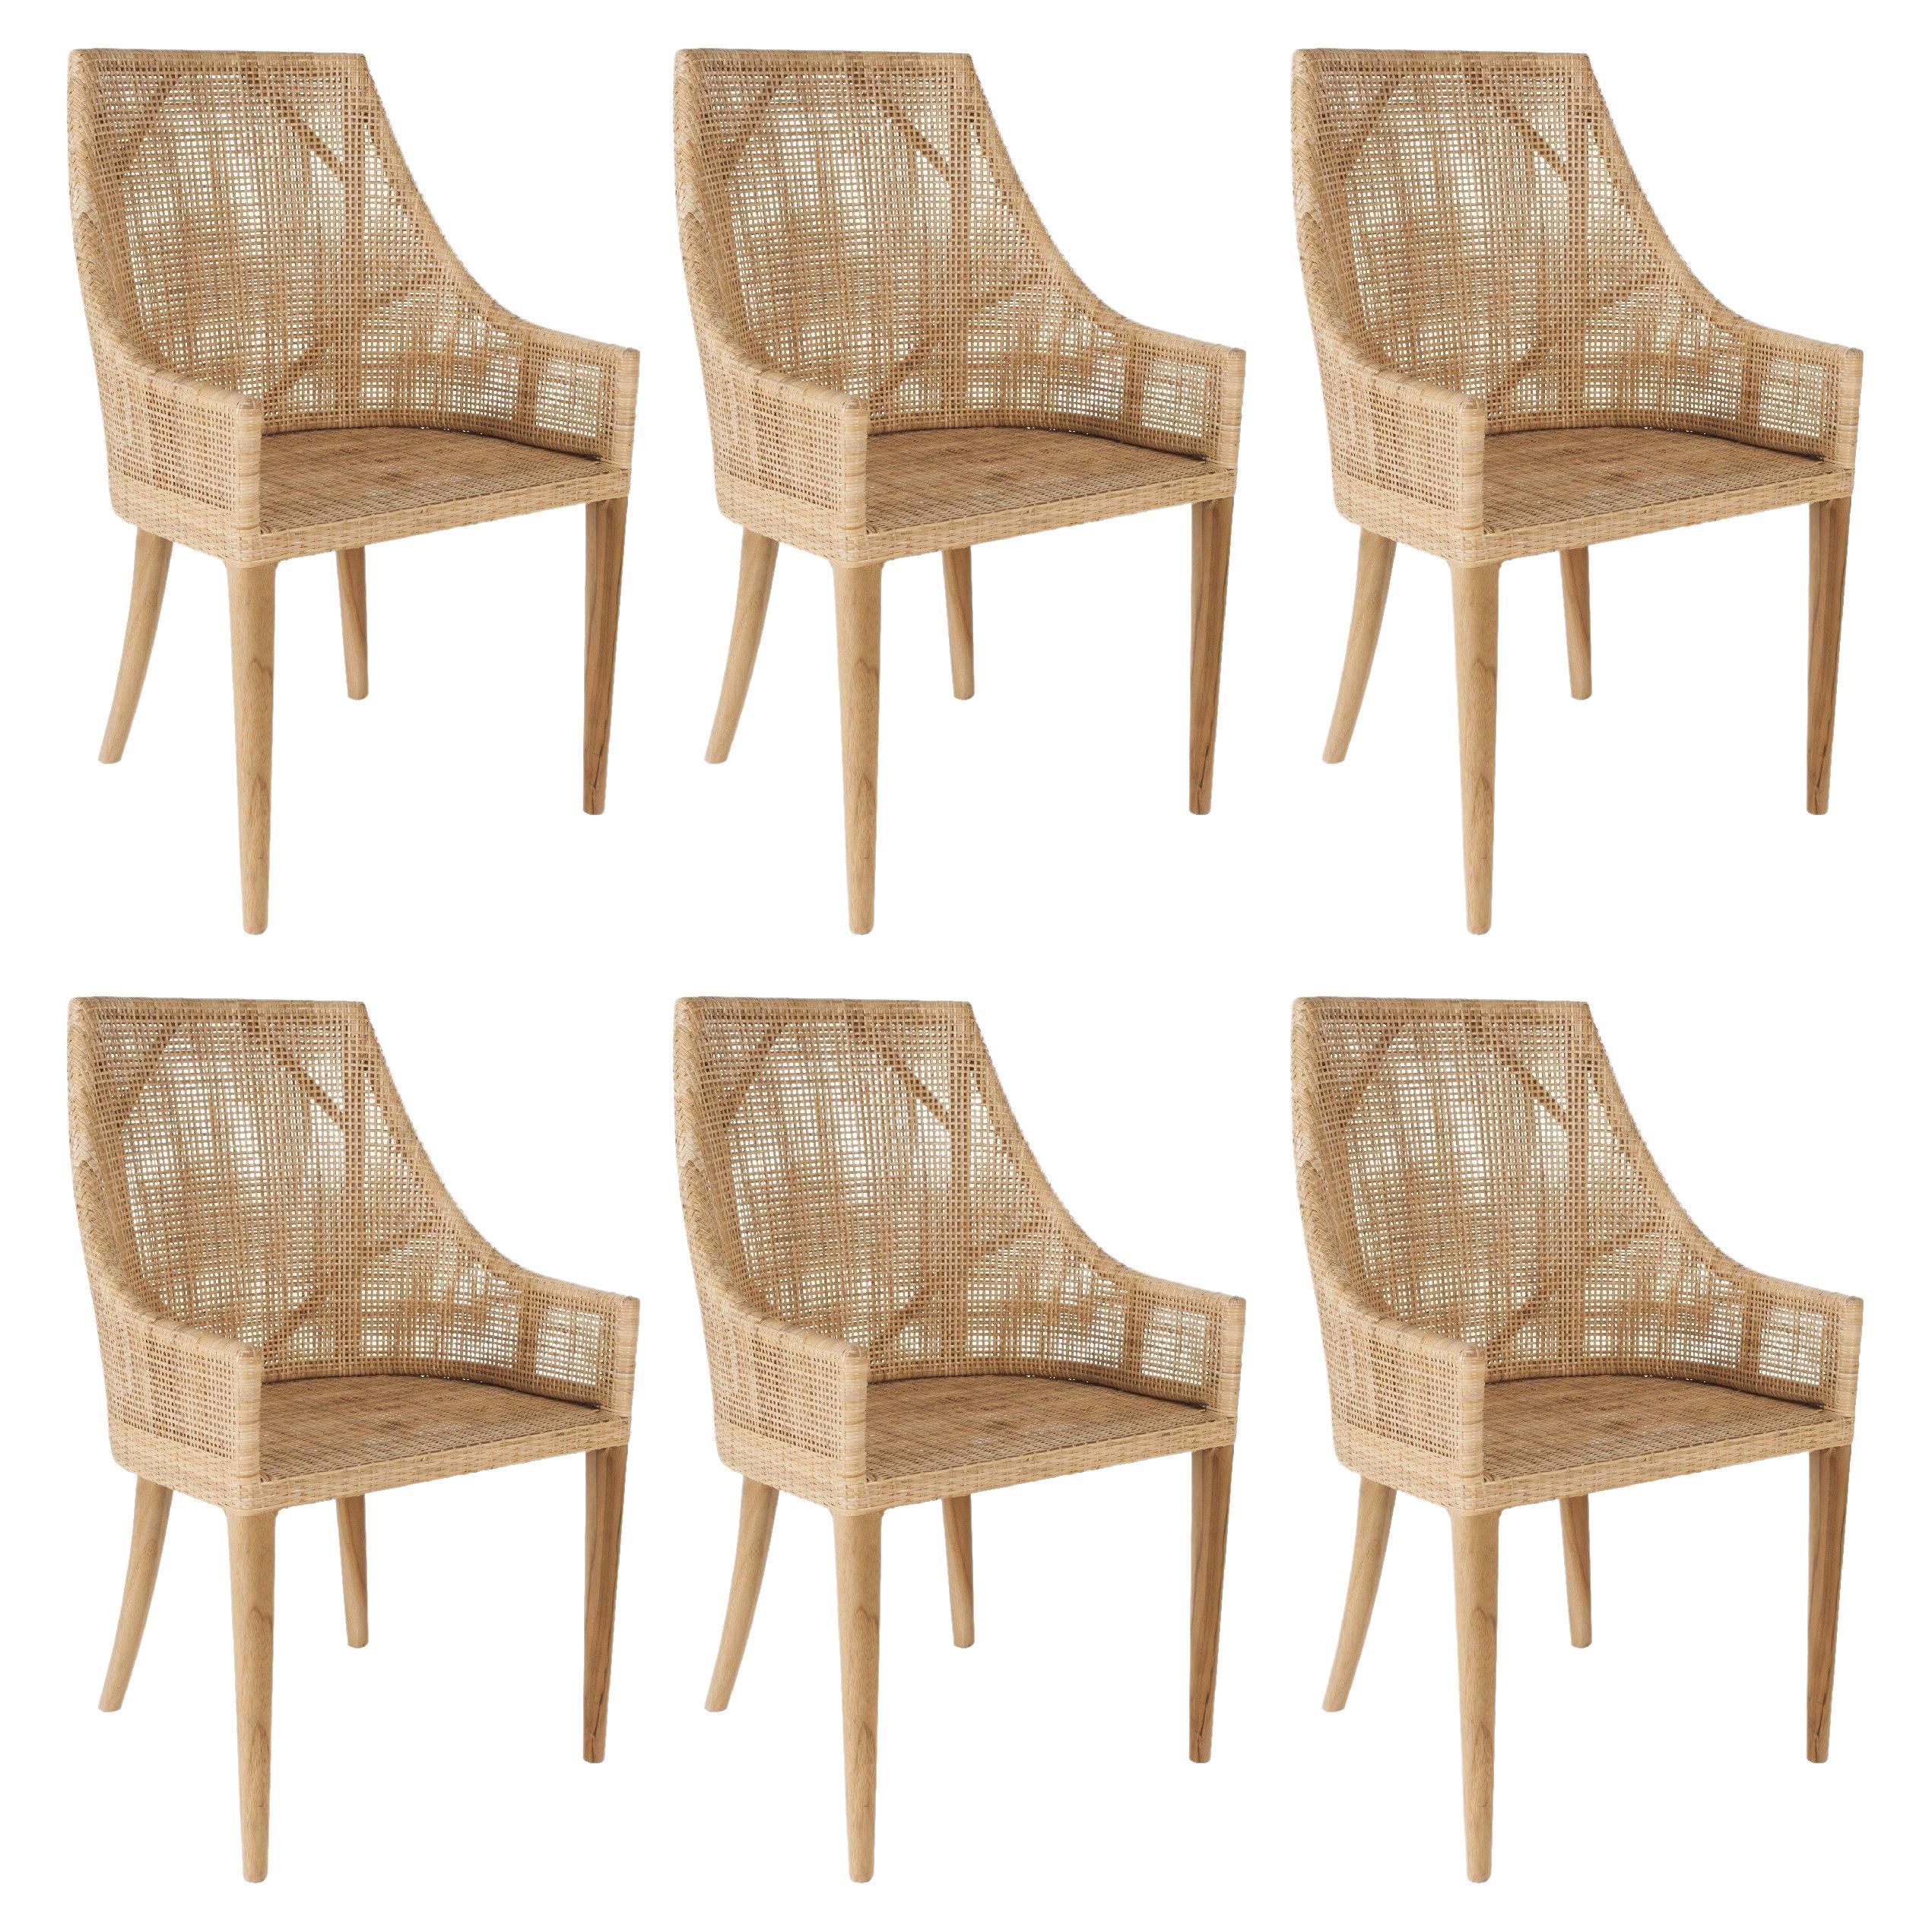 Handbraided Rattan and Wooden Set of Six Chairs